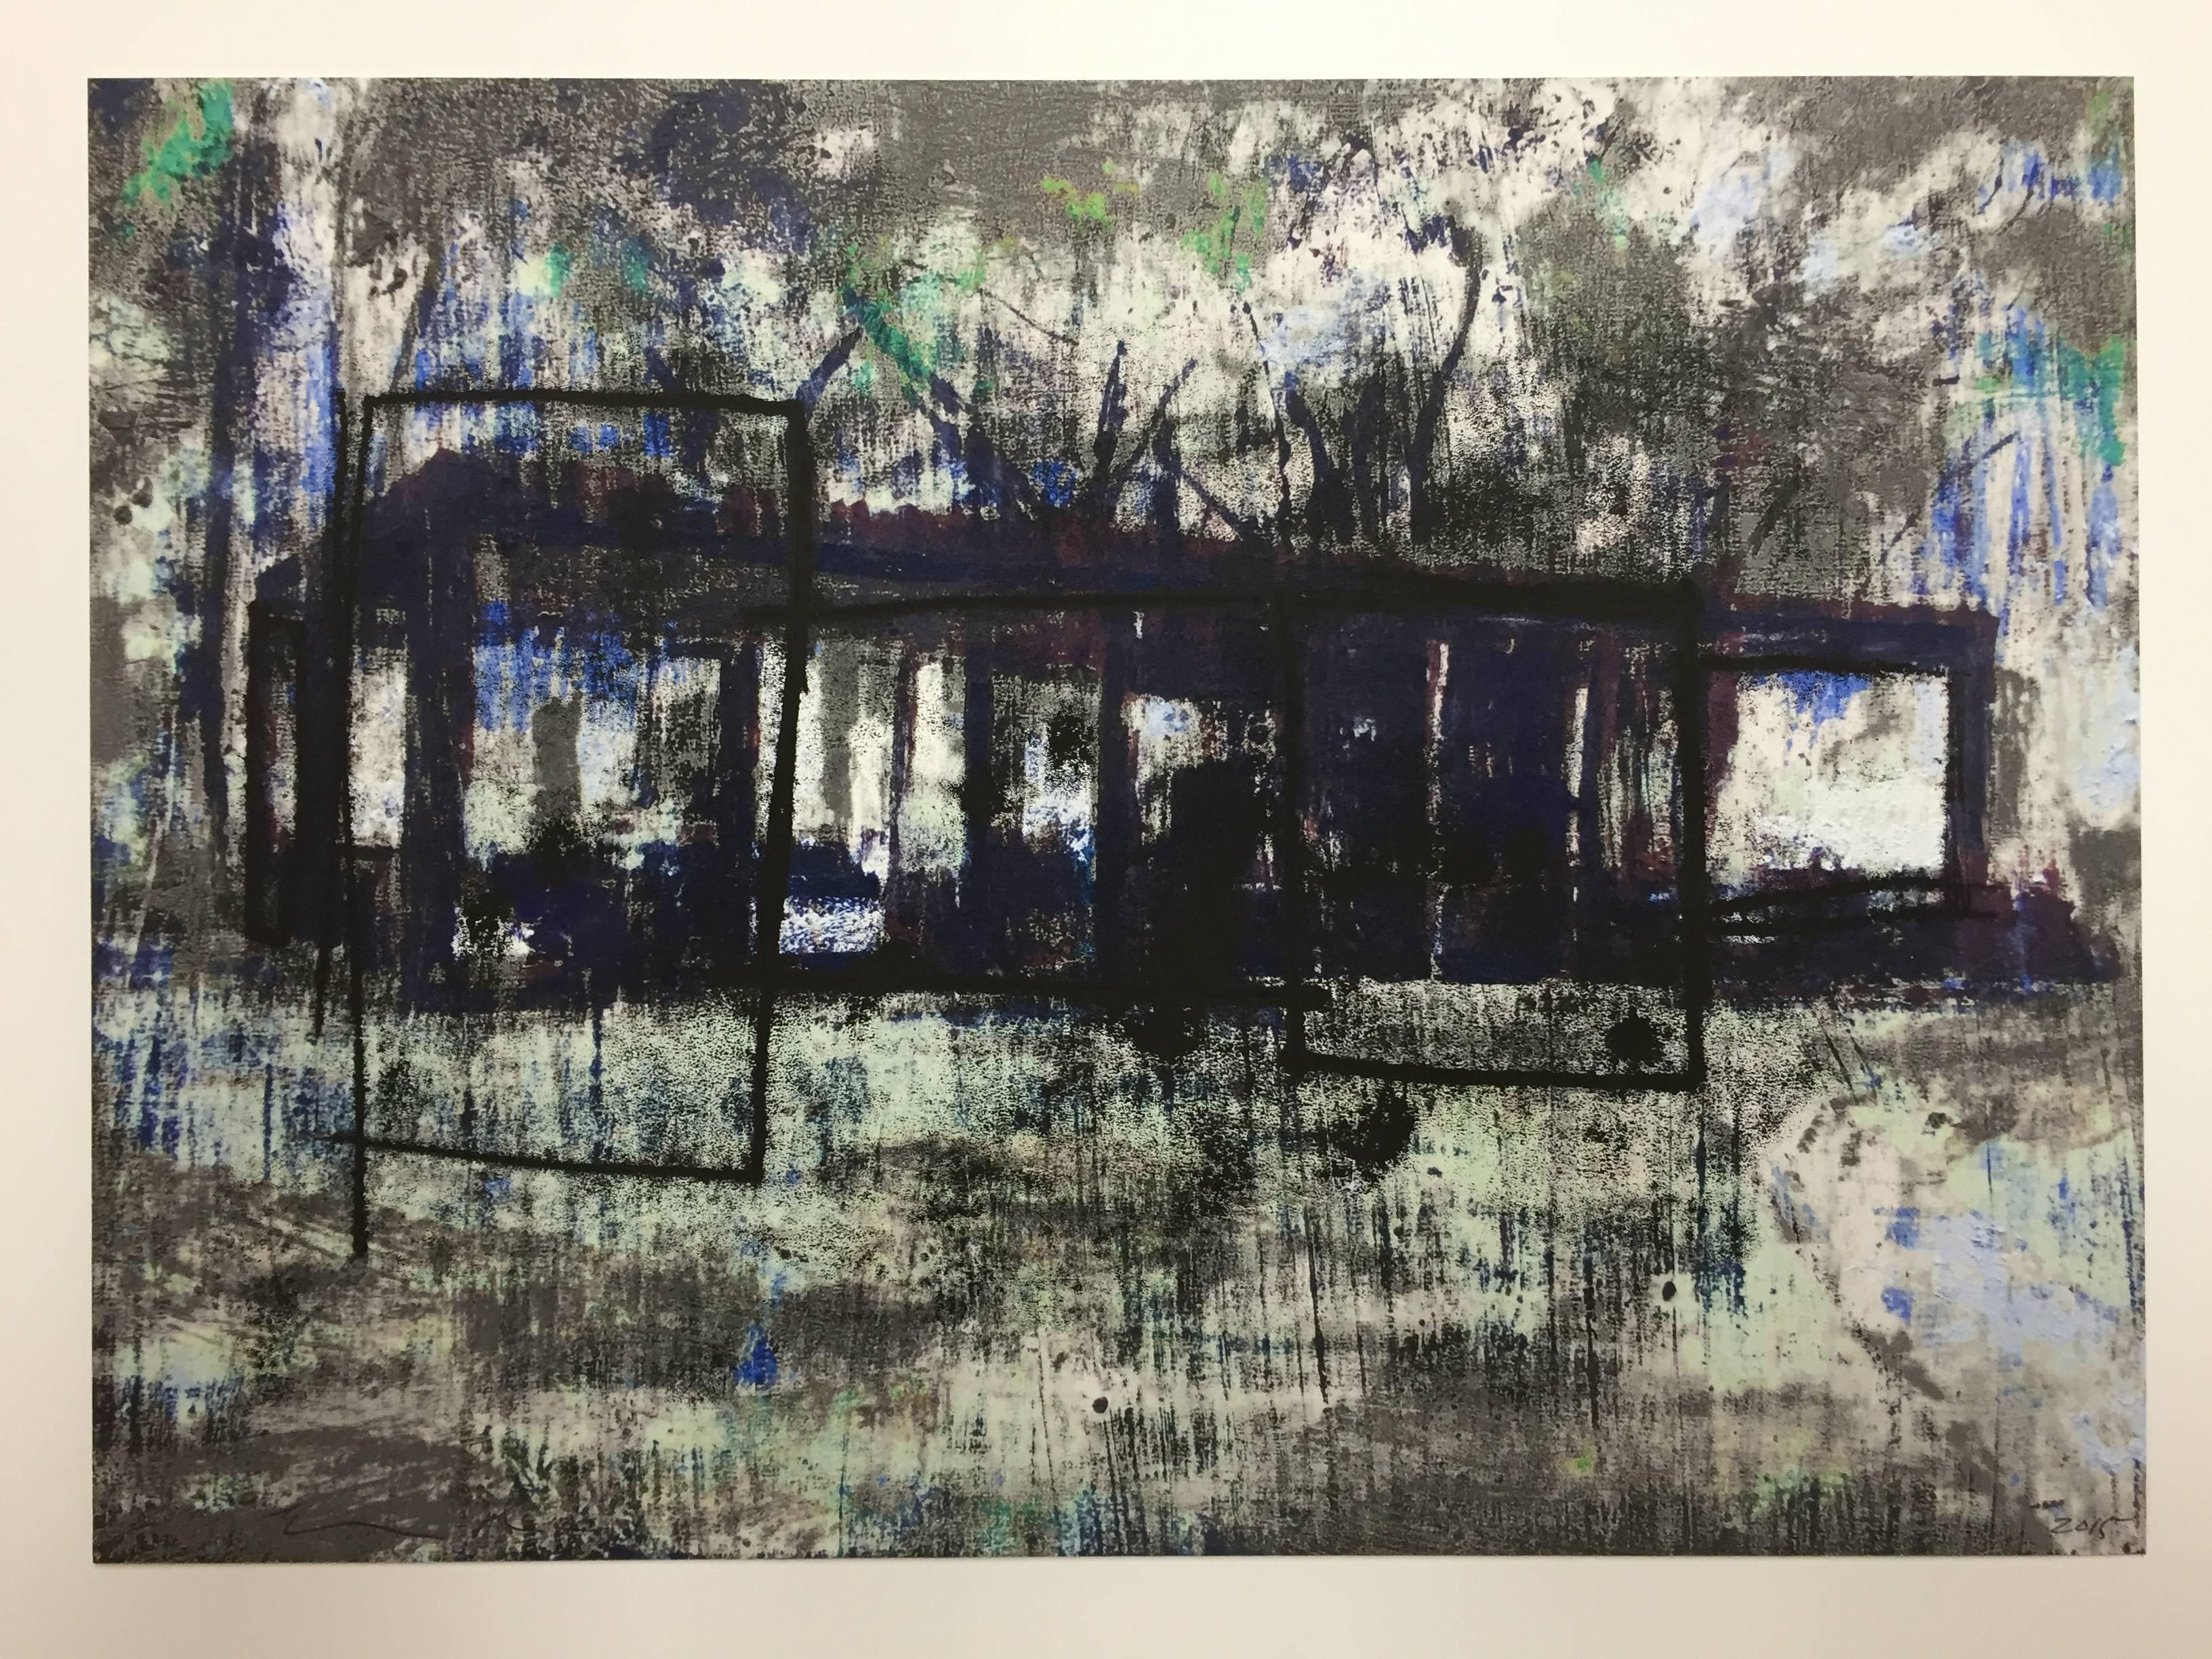 Enoc Perez.
Glass house, I (blue), I (yellow), III (gray), 2015.
Unique drawing with block ink on printed archival pigment inks on Crane Museo Max 365 gsm paper
Measures: 11 x 15.25 inches (each image)
Signed and dated, recto; numbered,